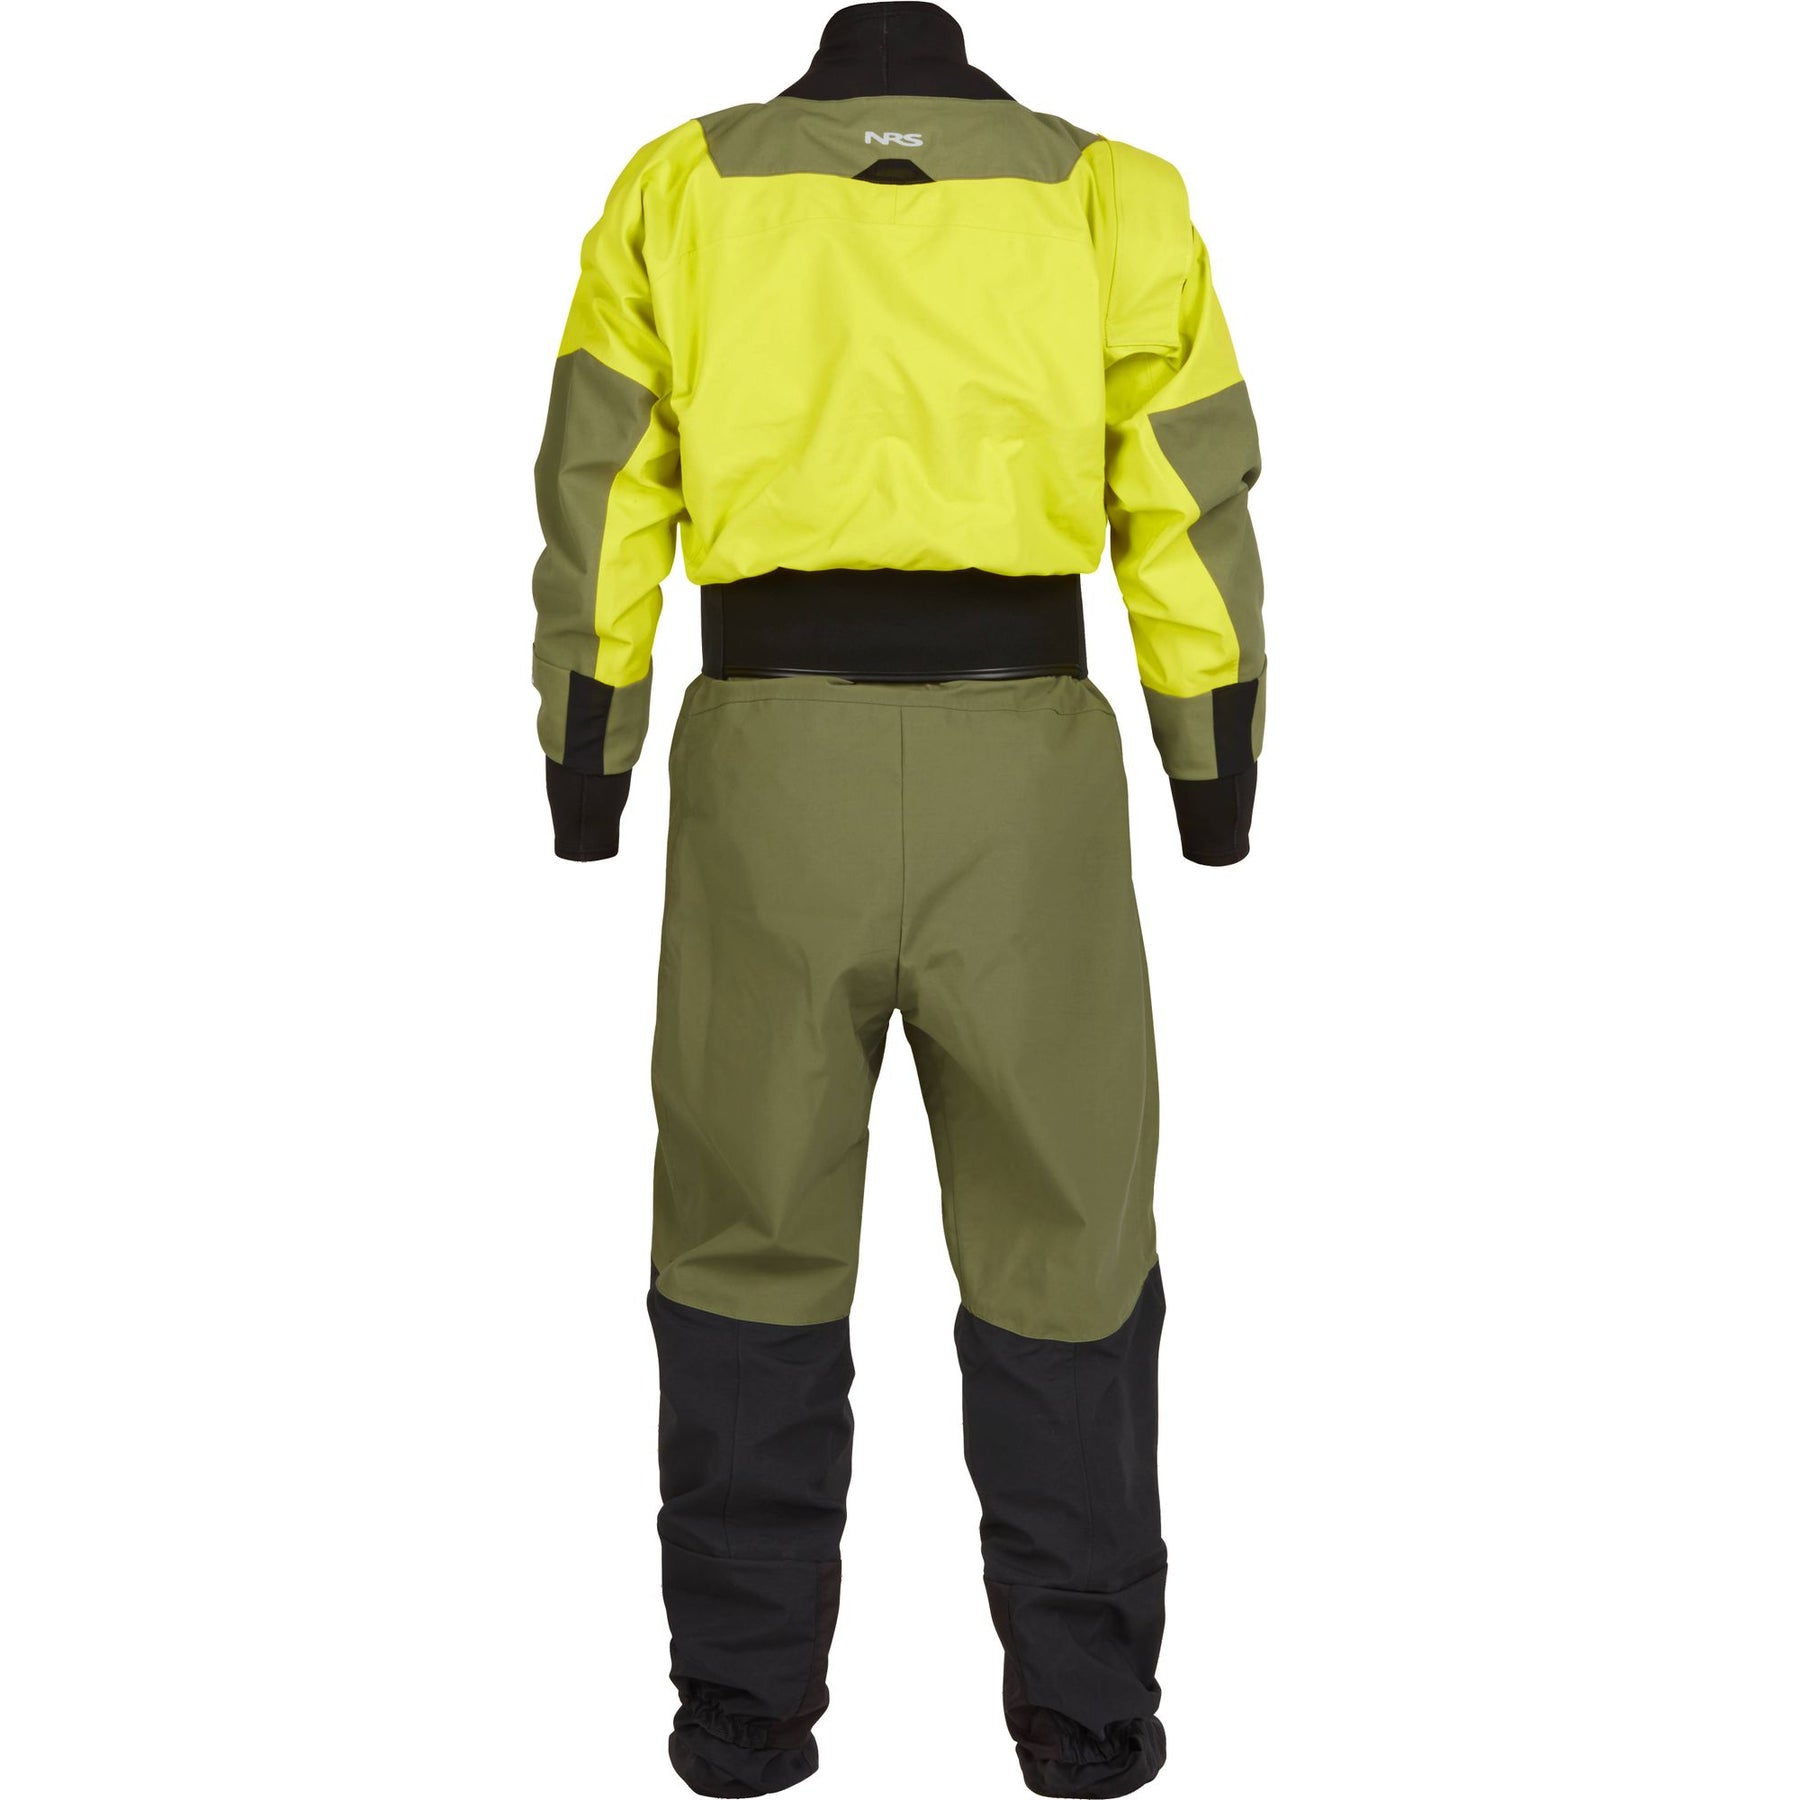 Atlan - Mista Dry Suit for cold water paddling safety – Old Creel 